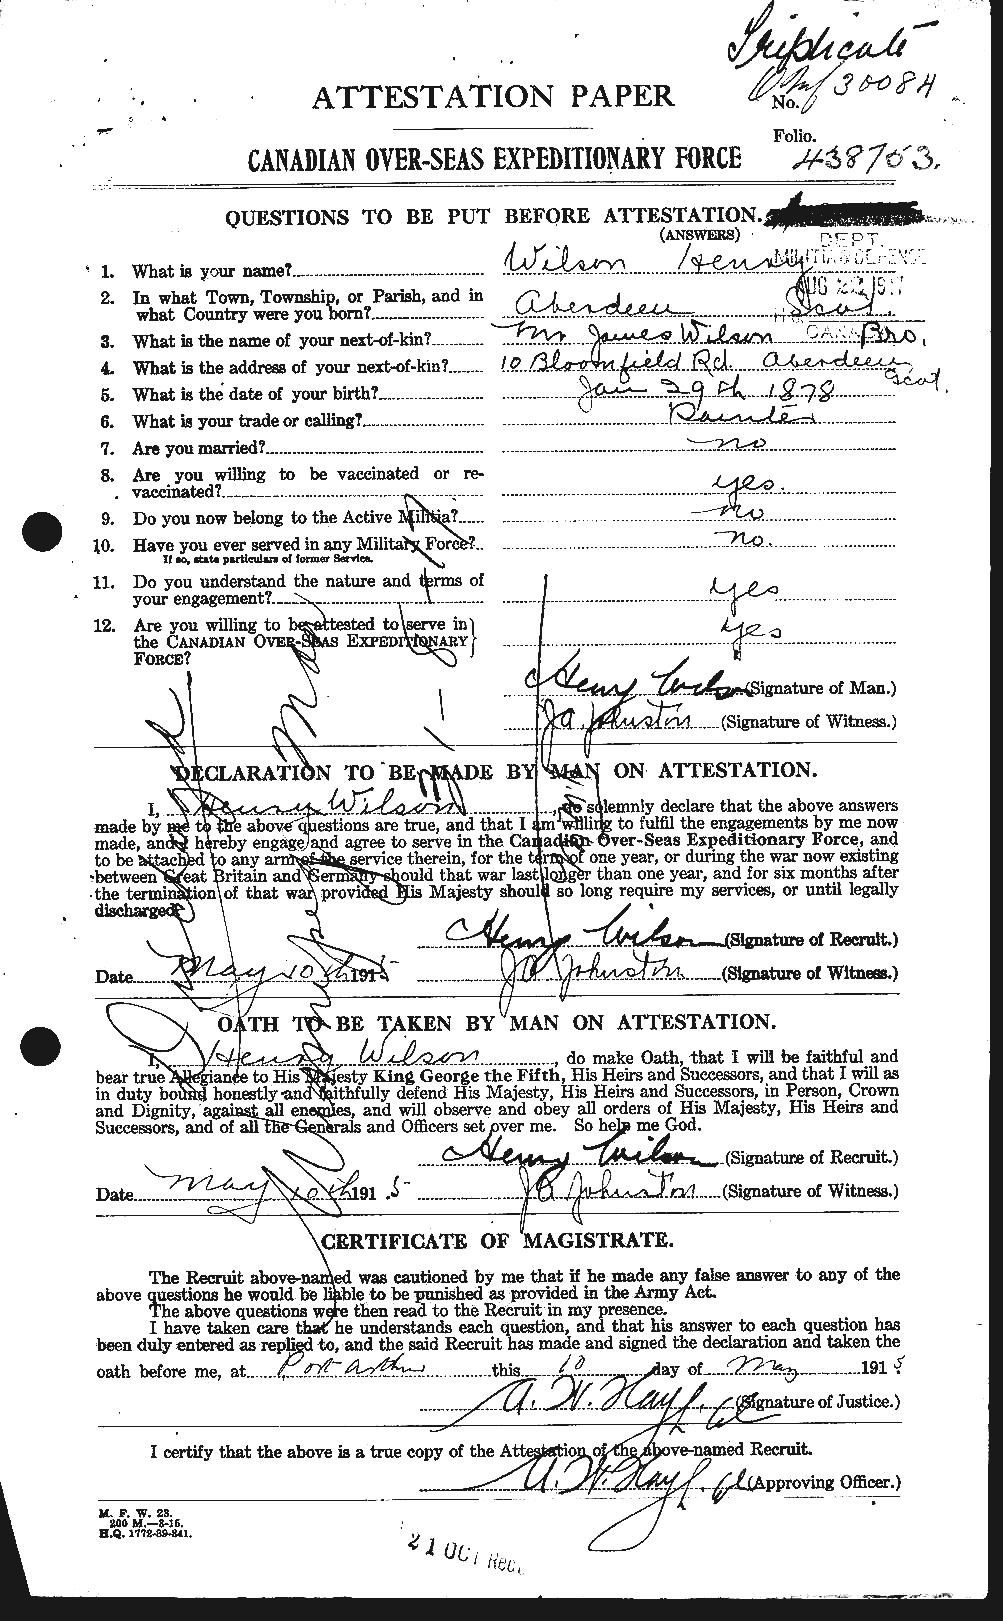 Personnel Records of the First World War - CEF 679513a